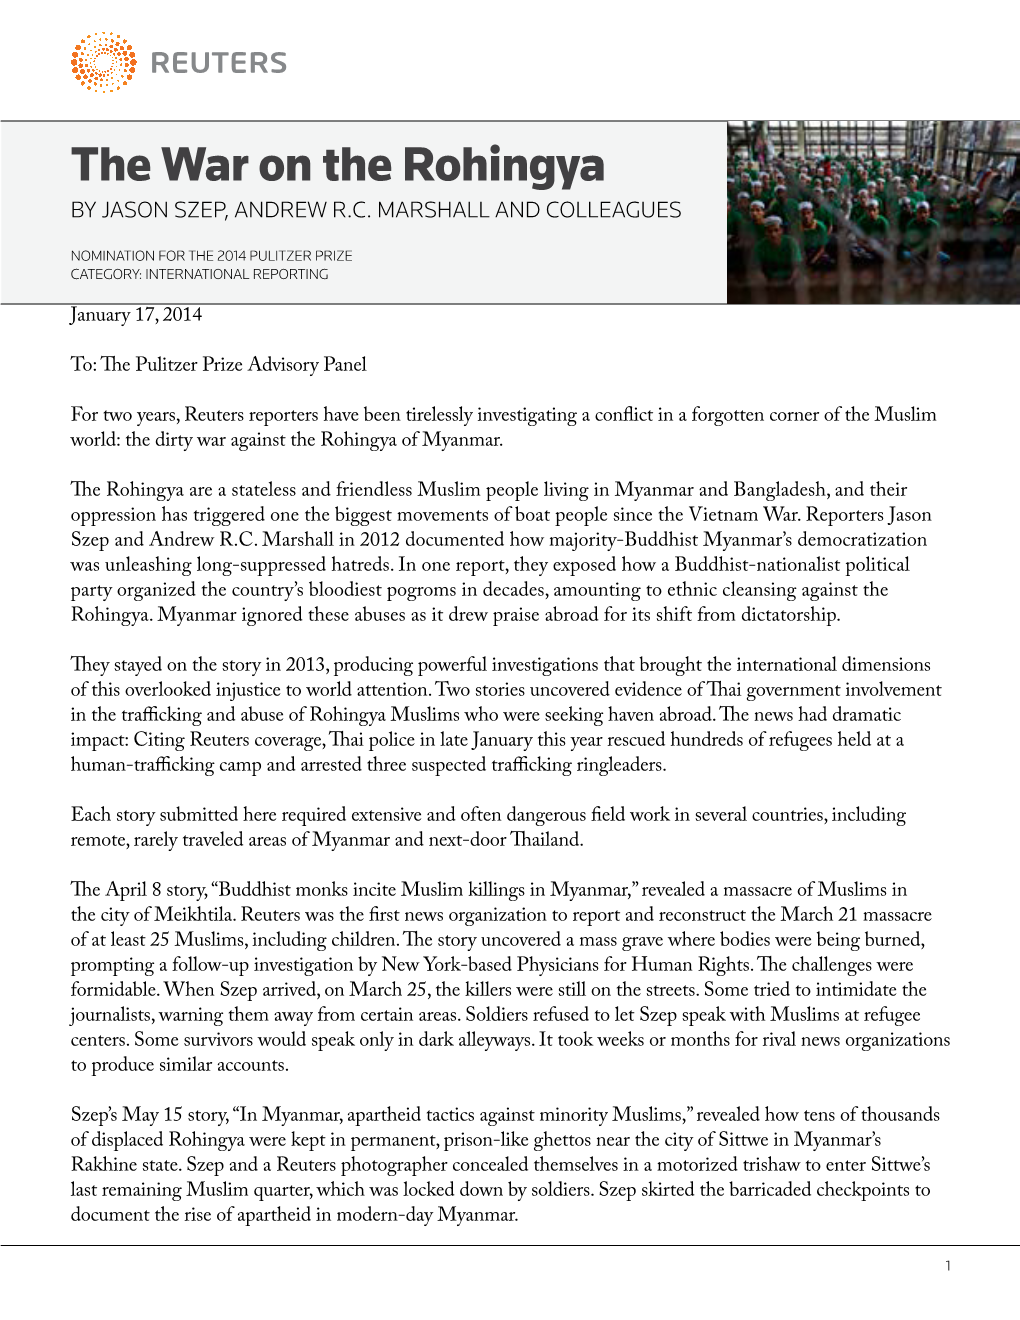 The War on the Rohingya by JASON SZEP, ANDREW R.C